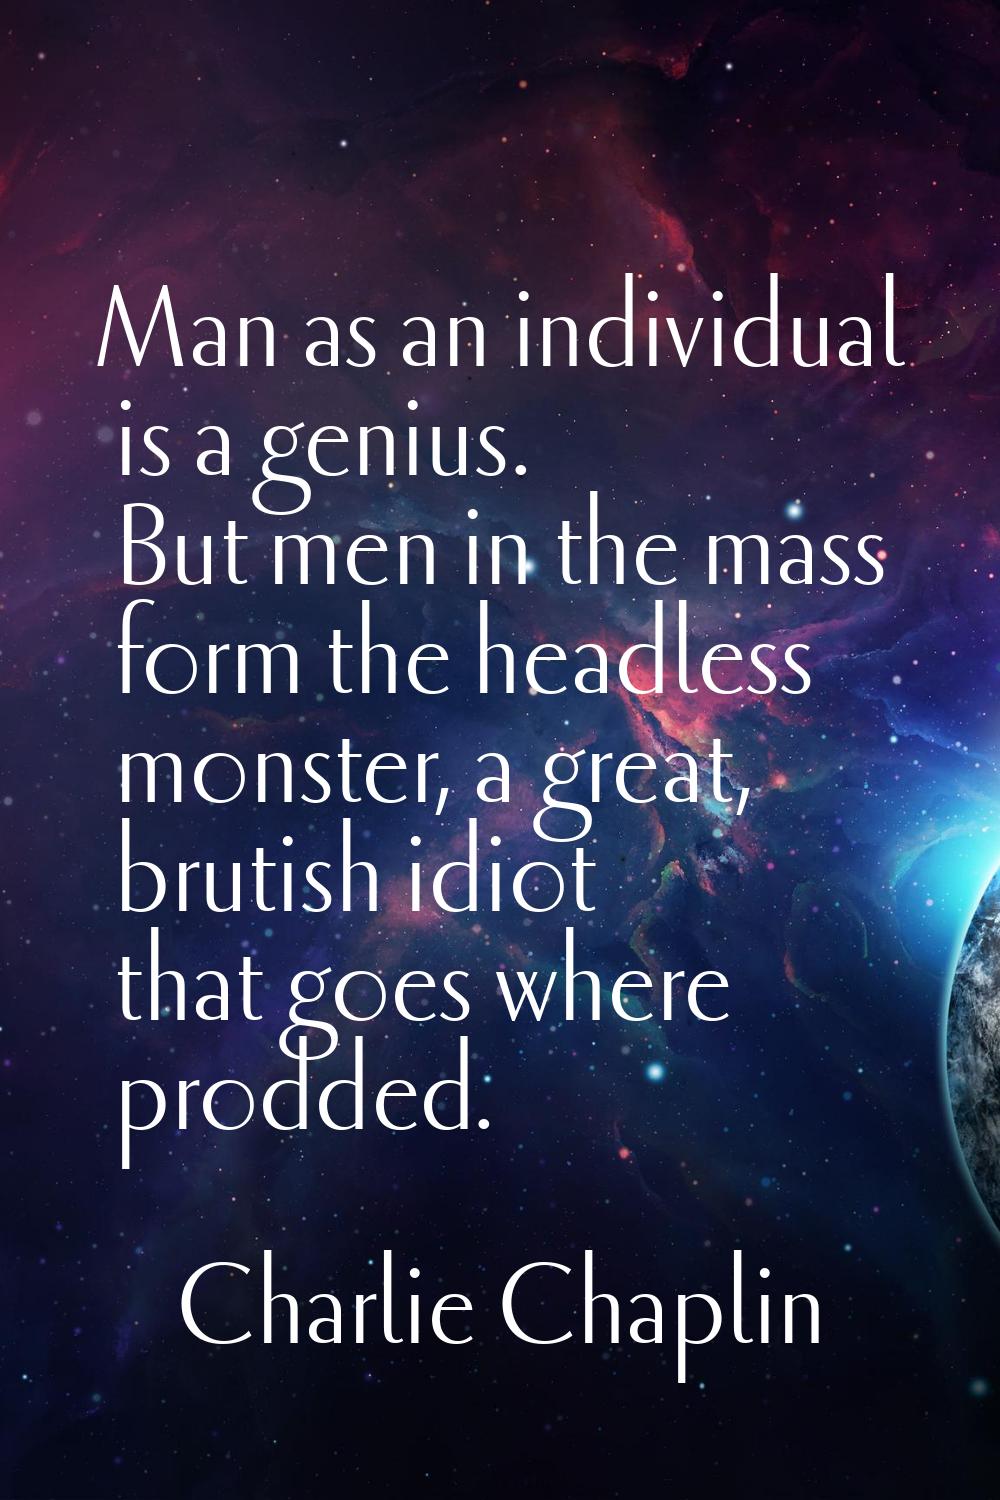 Man as an individual is a genius. But men in the mass form the headless monster, a great, brutish i